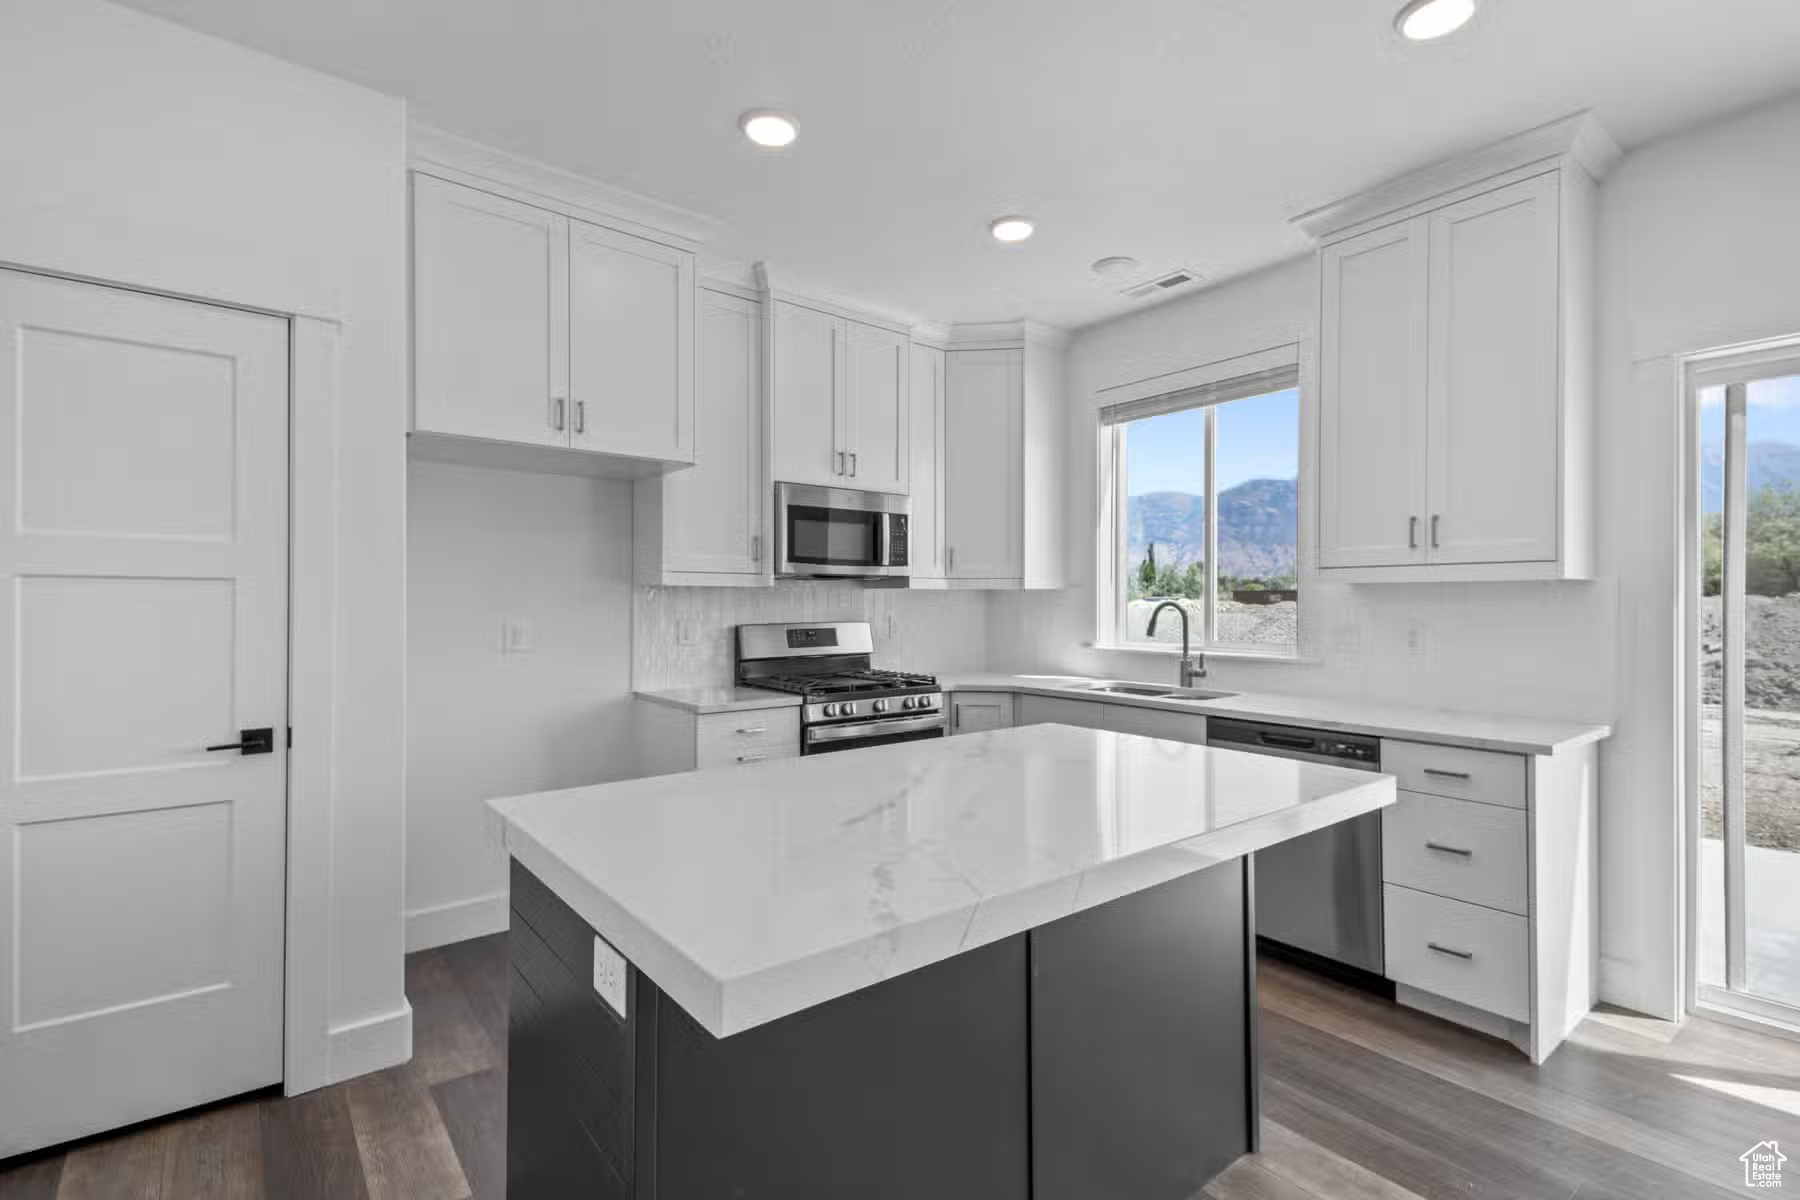 Kitchen featuring appliances with stainless steel finishes, plenty of natural light, hardwood / wood-style flooring, and white cabinetry